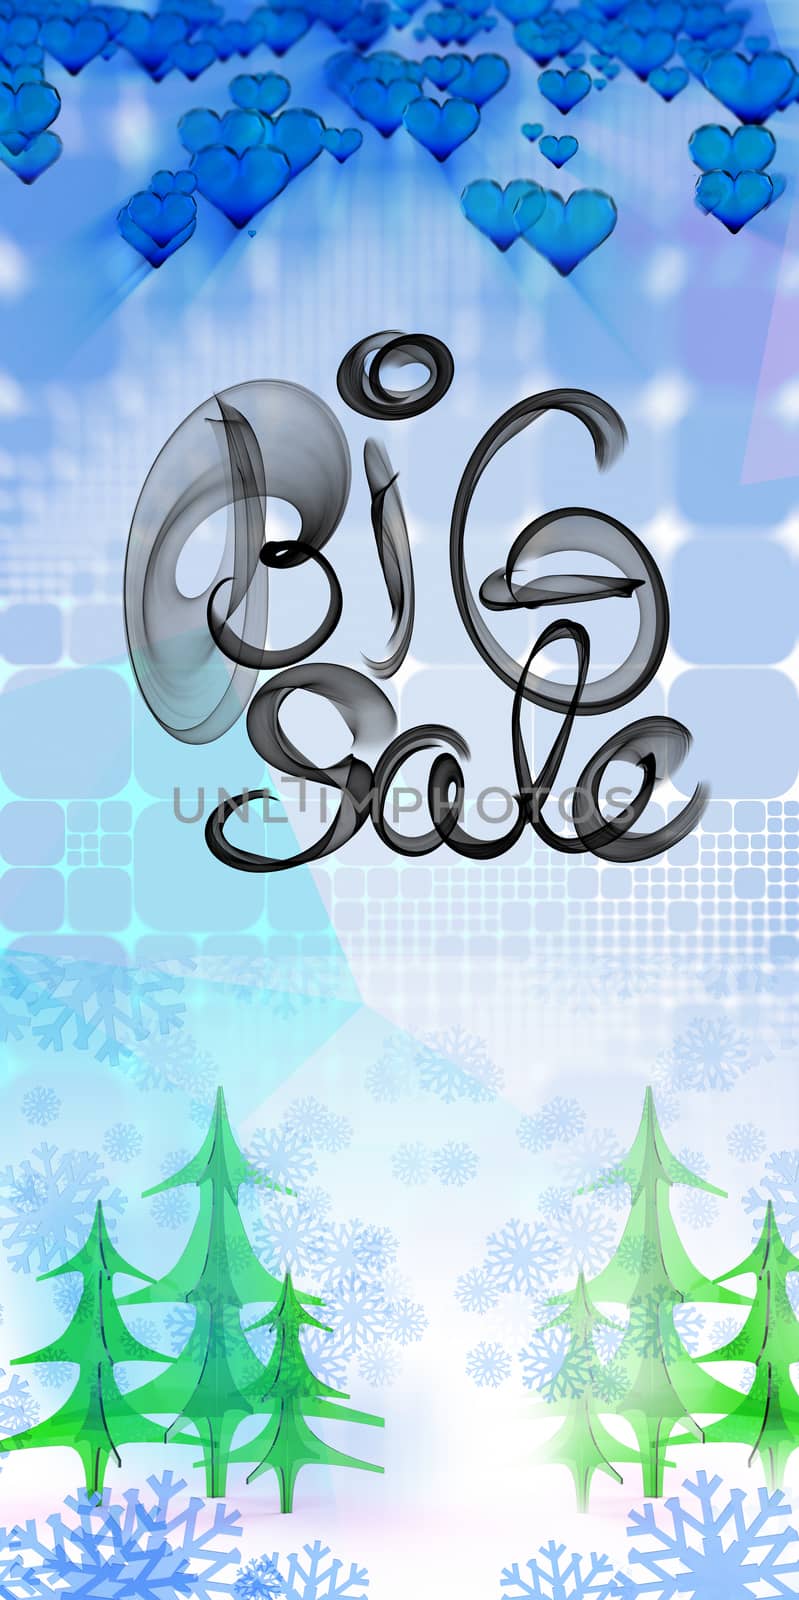 Big sale lettering written with black smoke or flame on geometric square abstract background with christmas tree and snowflake. 3d illustration by skrotov